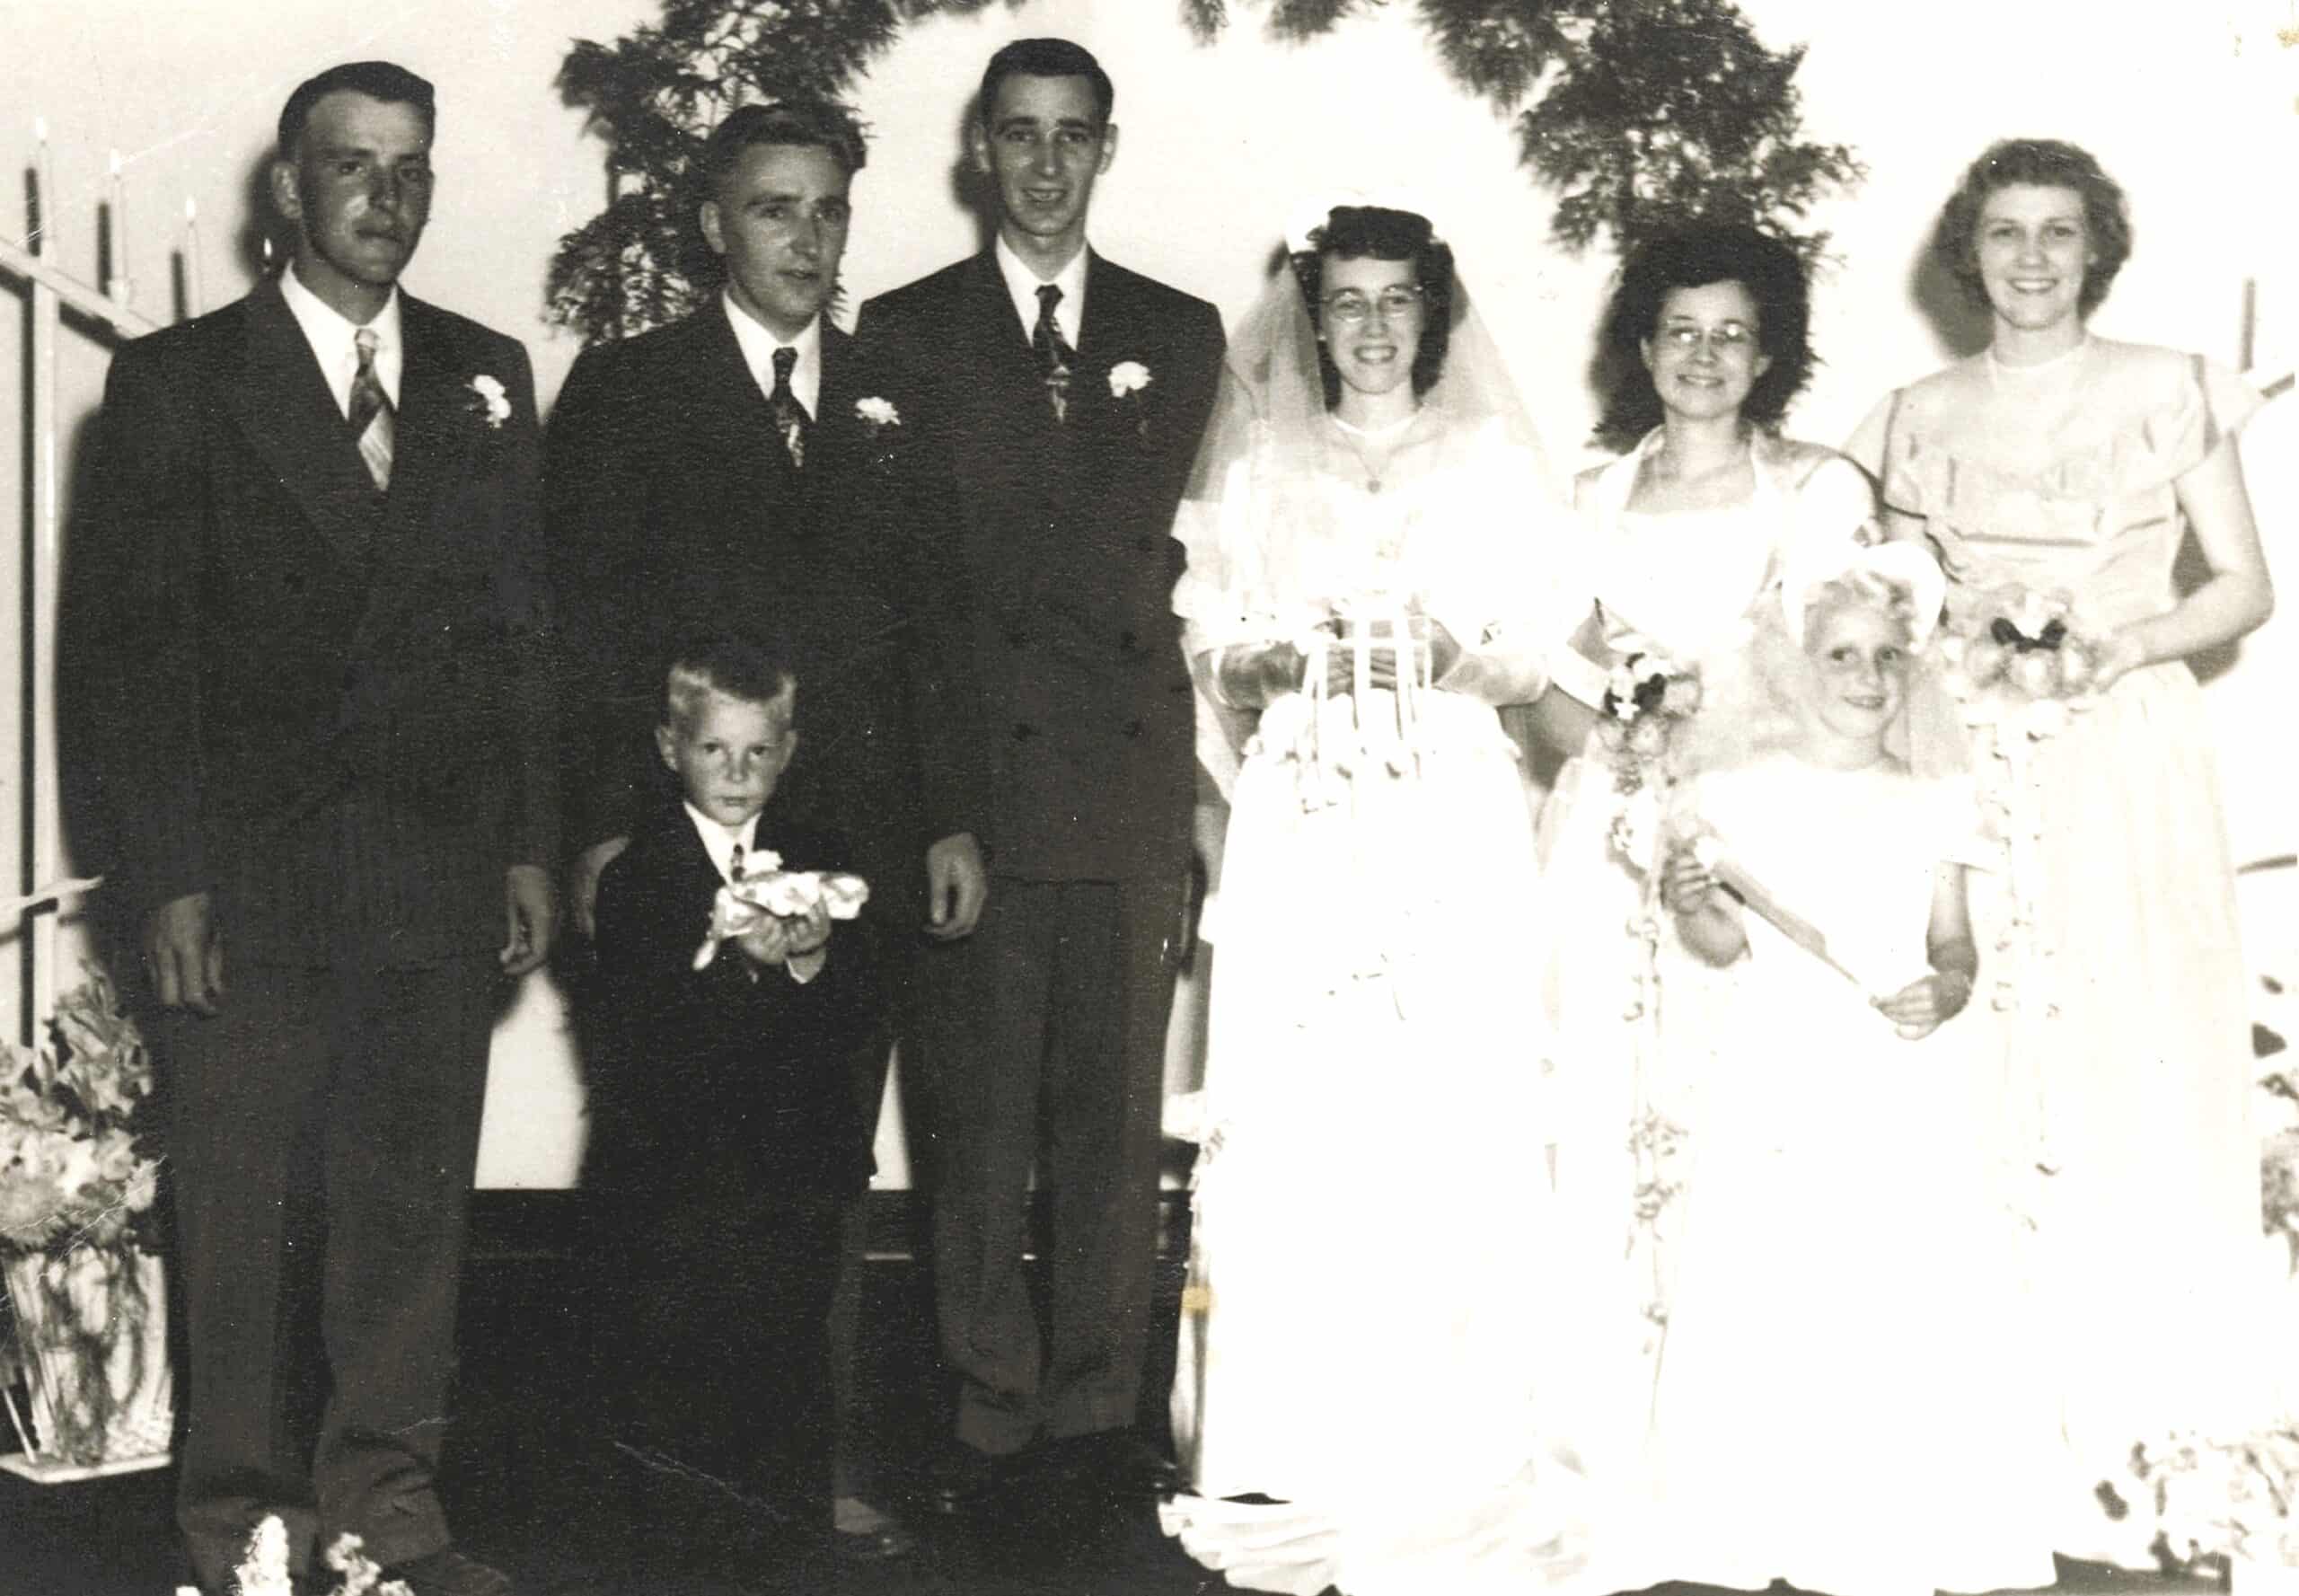 Bridal party in 1949